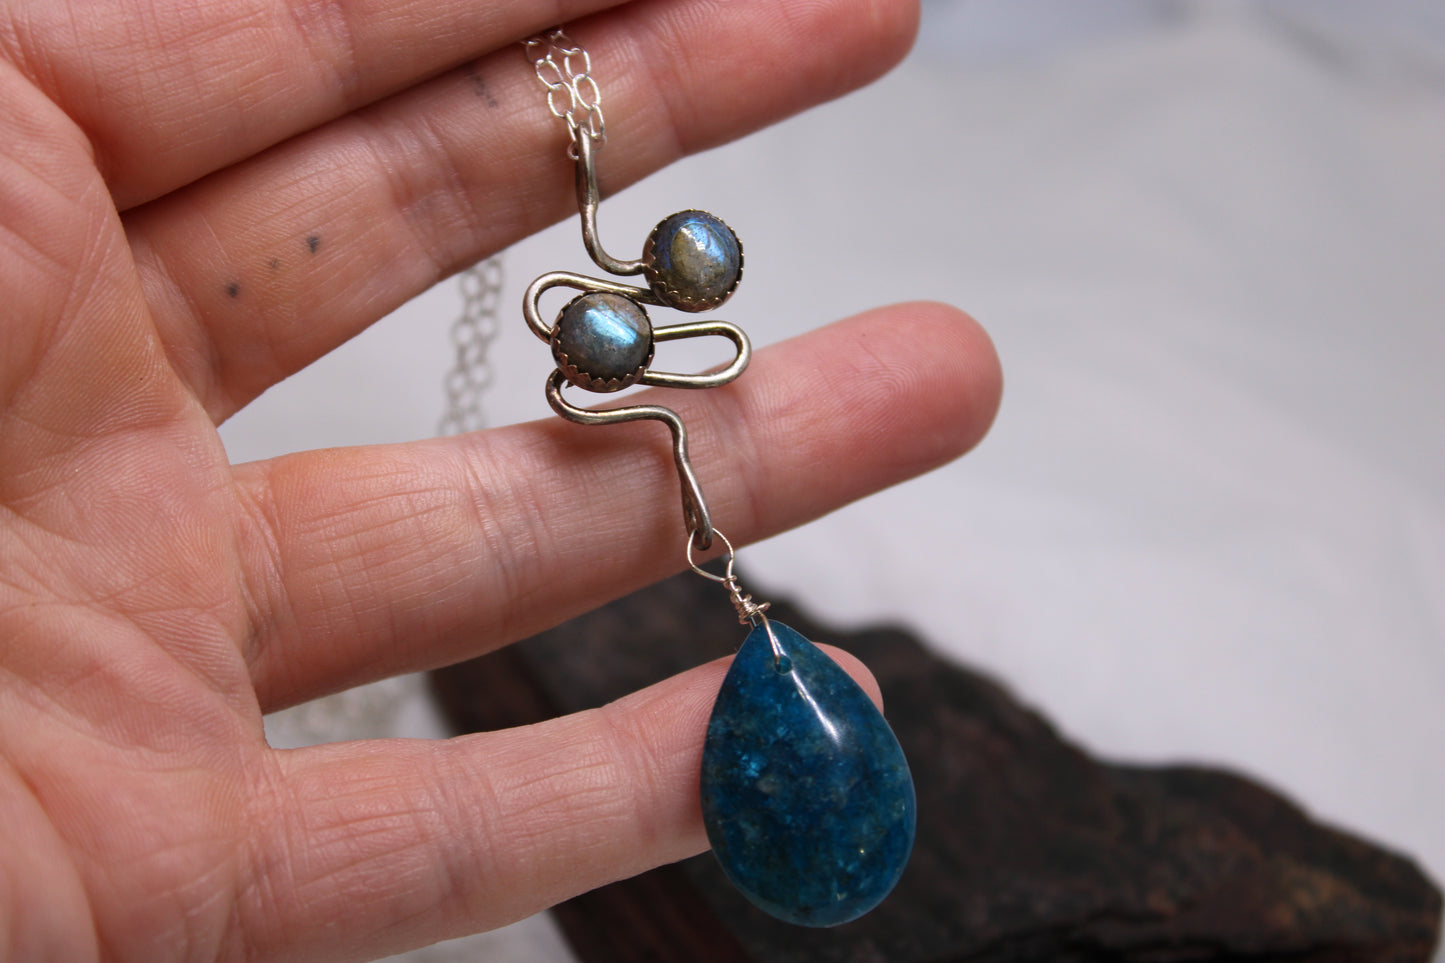 Geometric Sterling Silver Pendant with Blue Apatite and Labradorite Stones